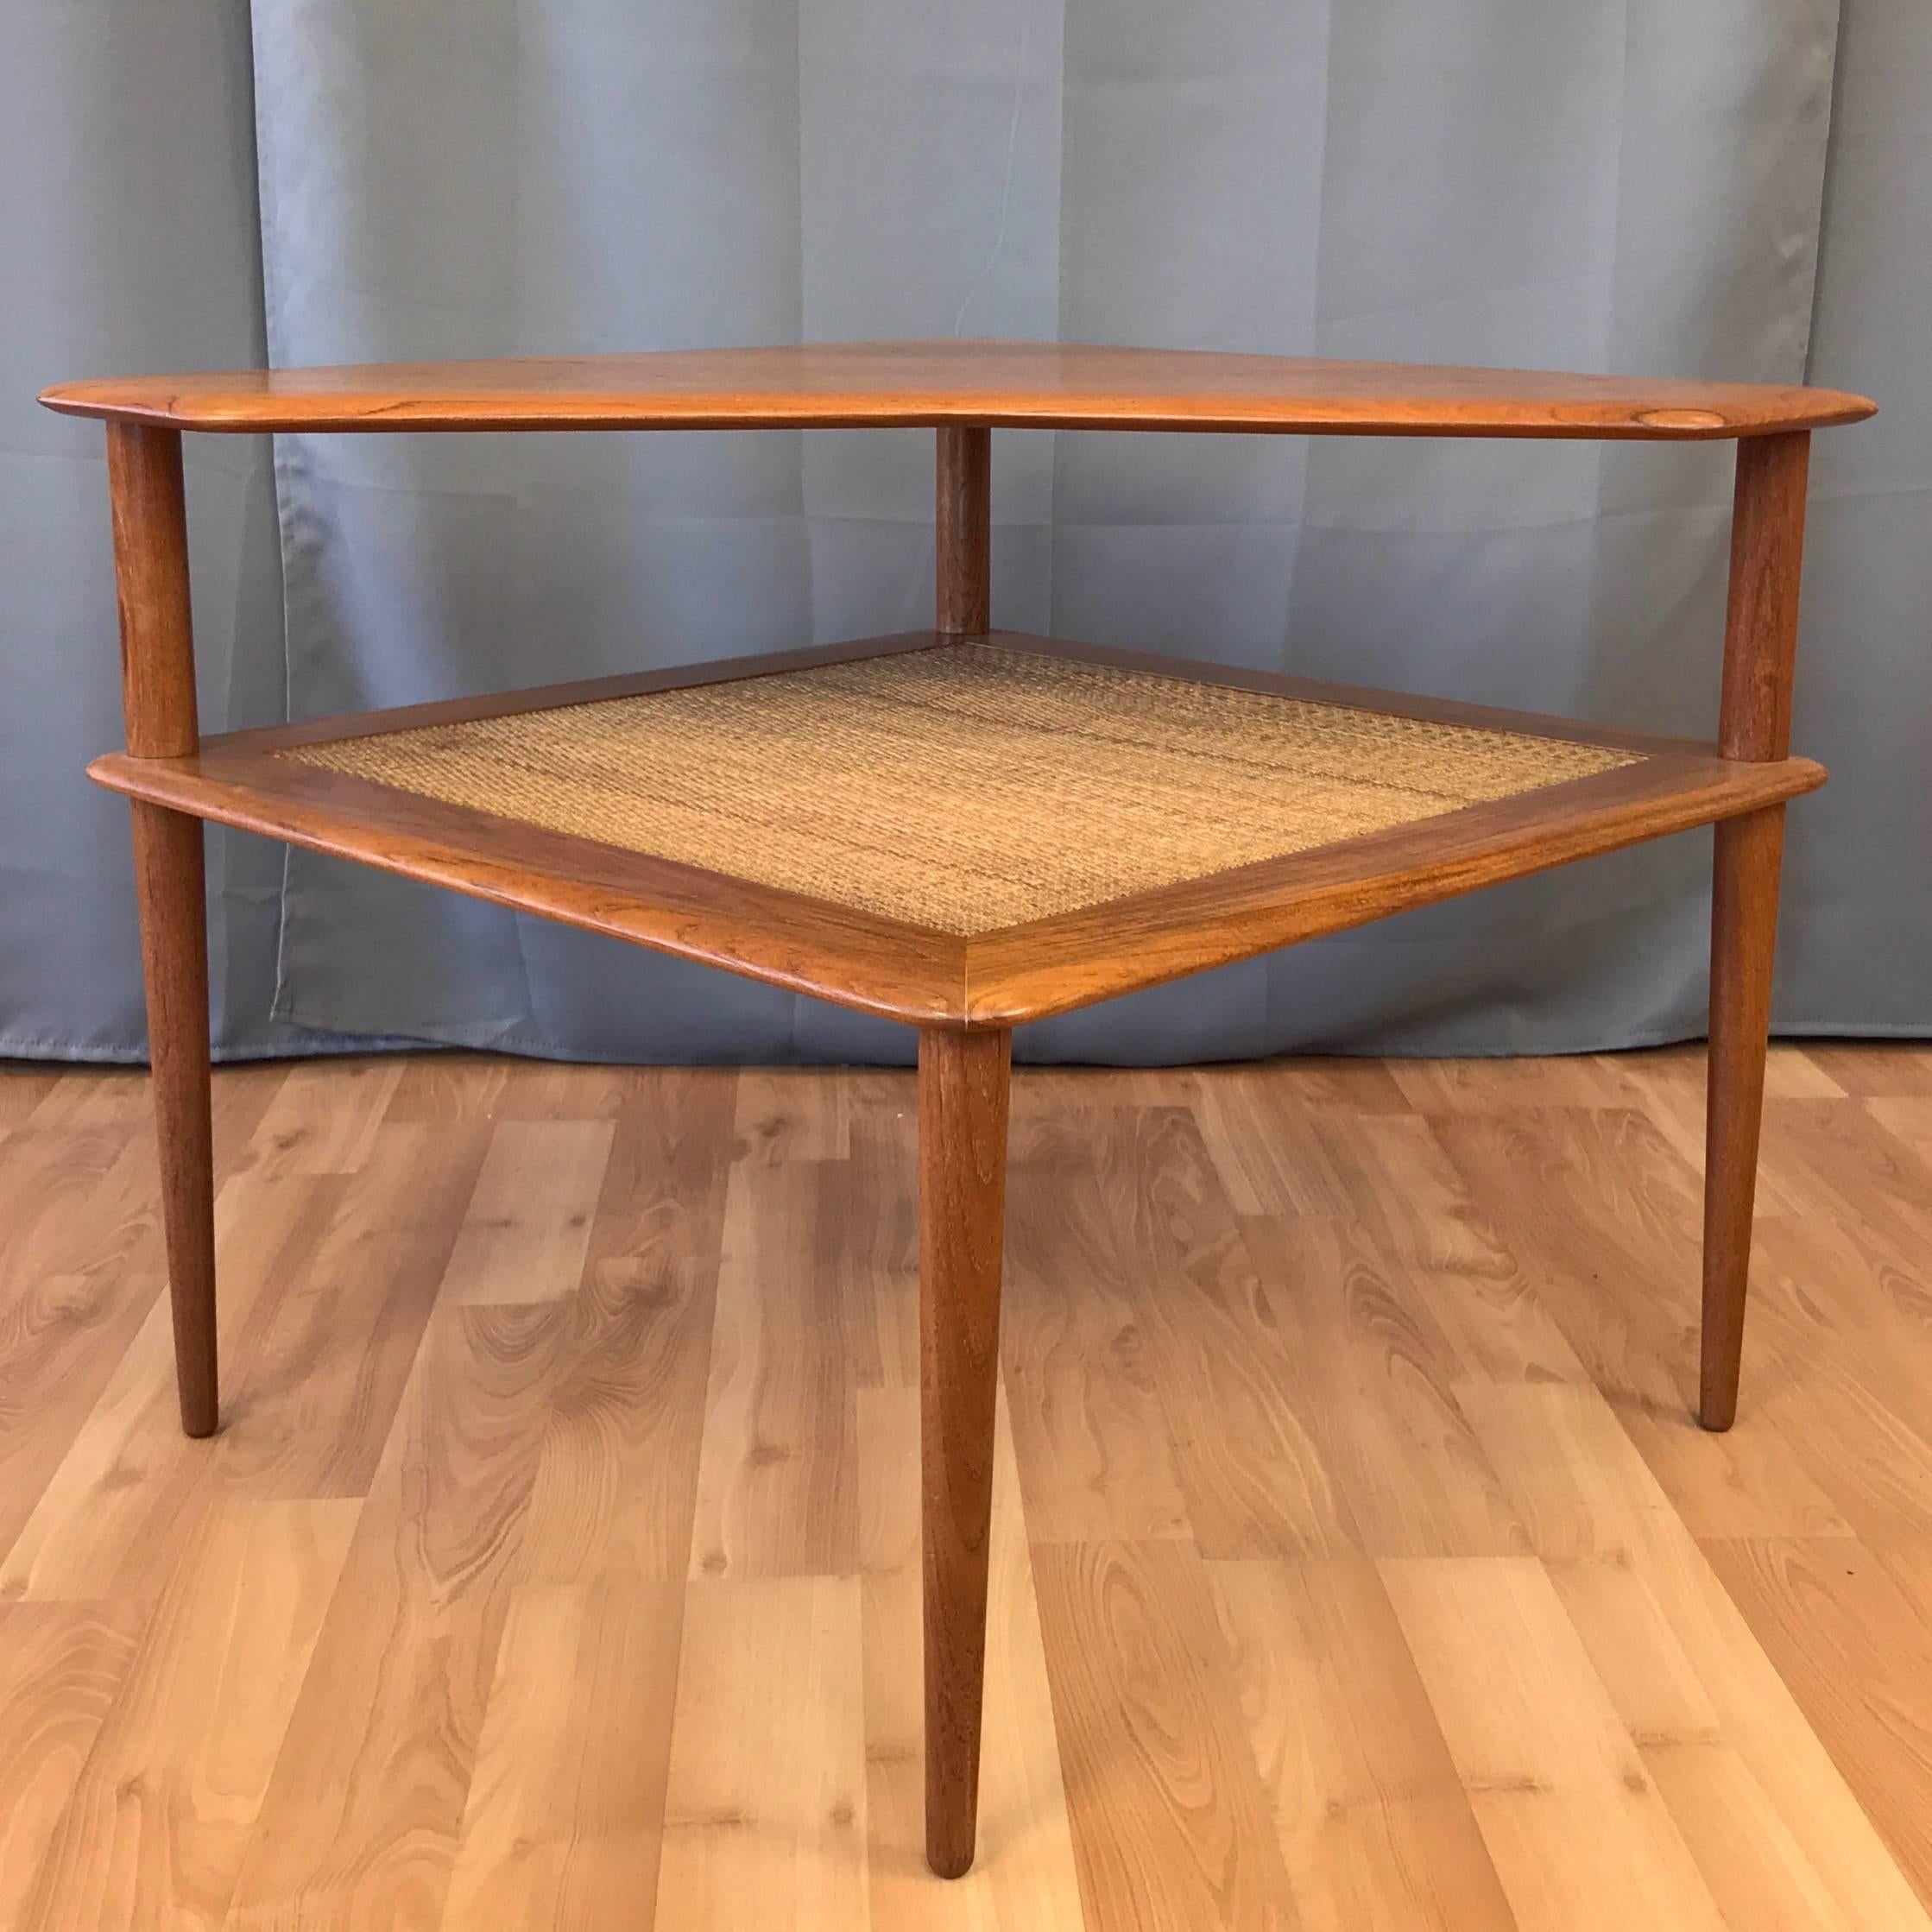 A Scandinavian Modern teak and cane “Minerva” corner or end table by Peter Hvidt & Orla Mølgaard-Nielsen for France & Søn.

Solid teak square two-tier table with new vintage-finish woven cane lower level and cut-away upper level. Smoothly tapered